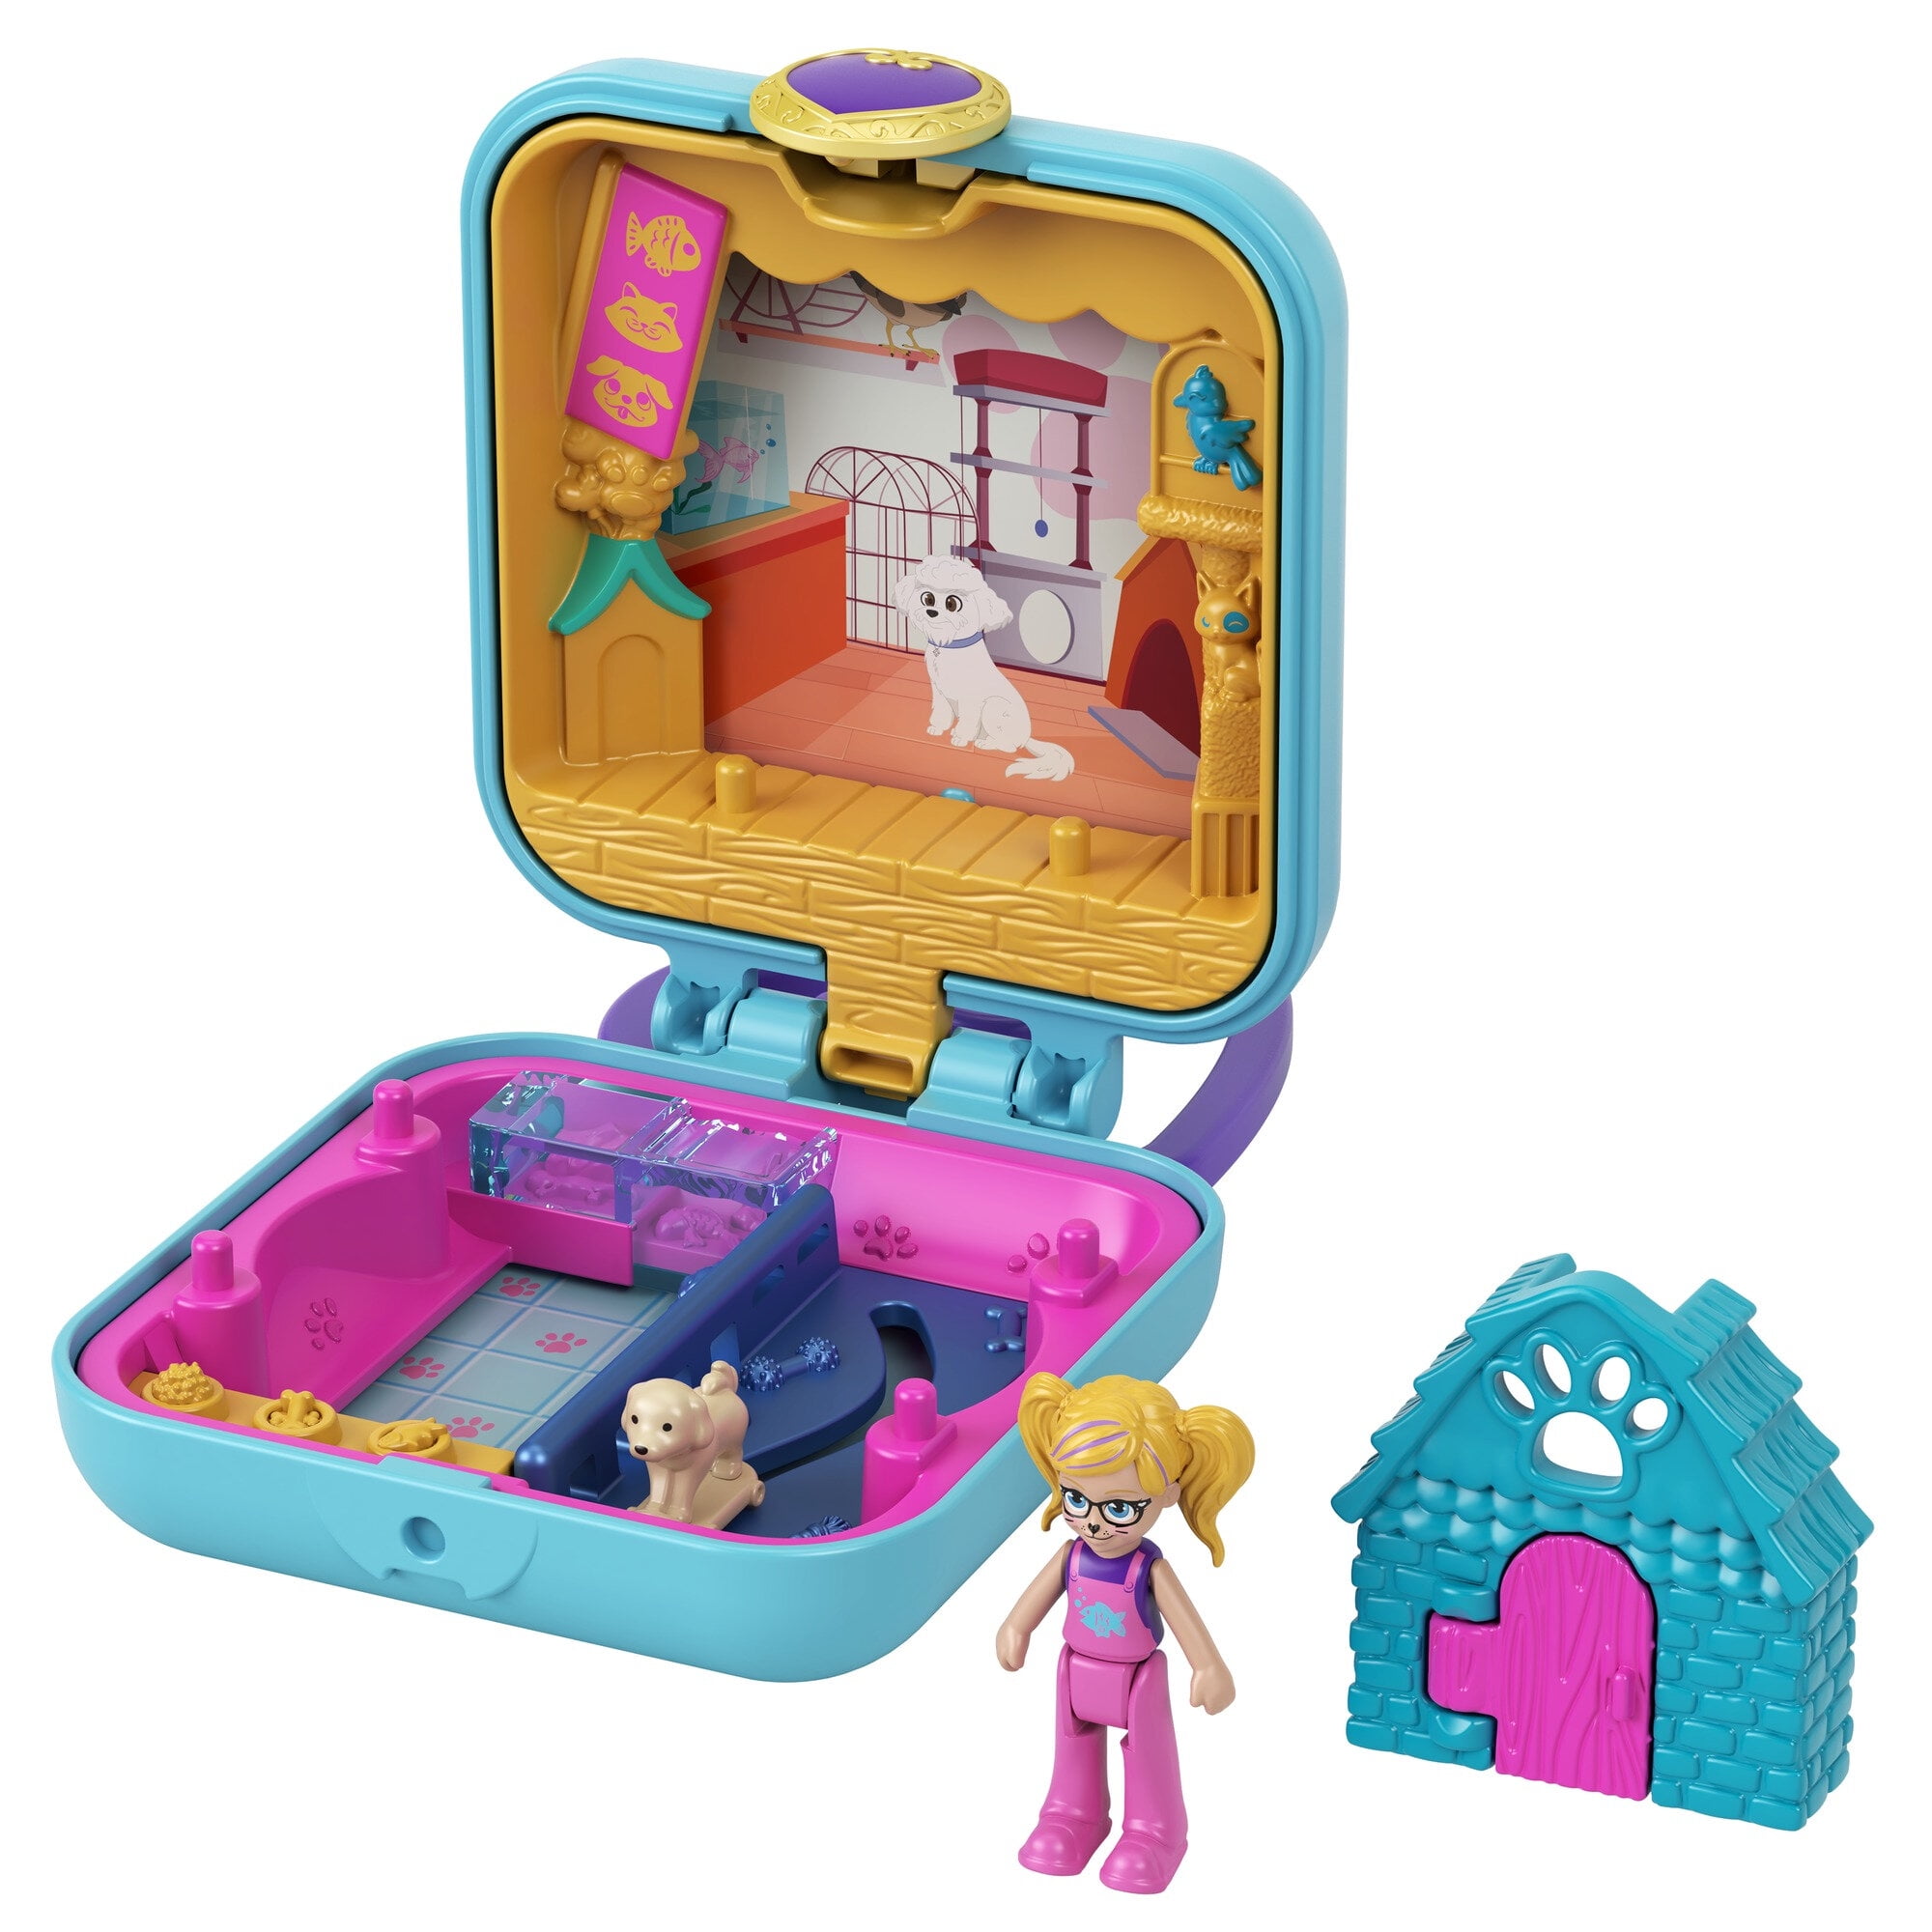 POLLY POCKET POLLY'S LIVING ROOM GCN07 ***NEW*** TINY PLACES 